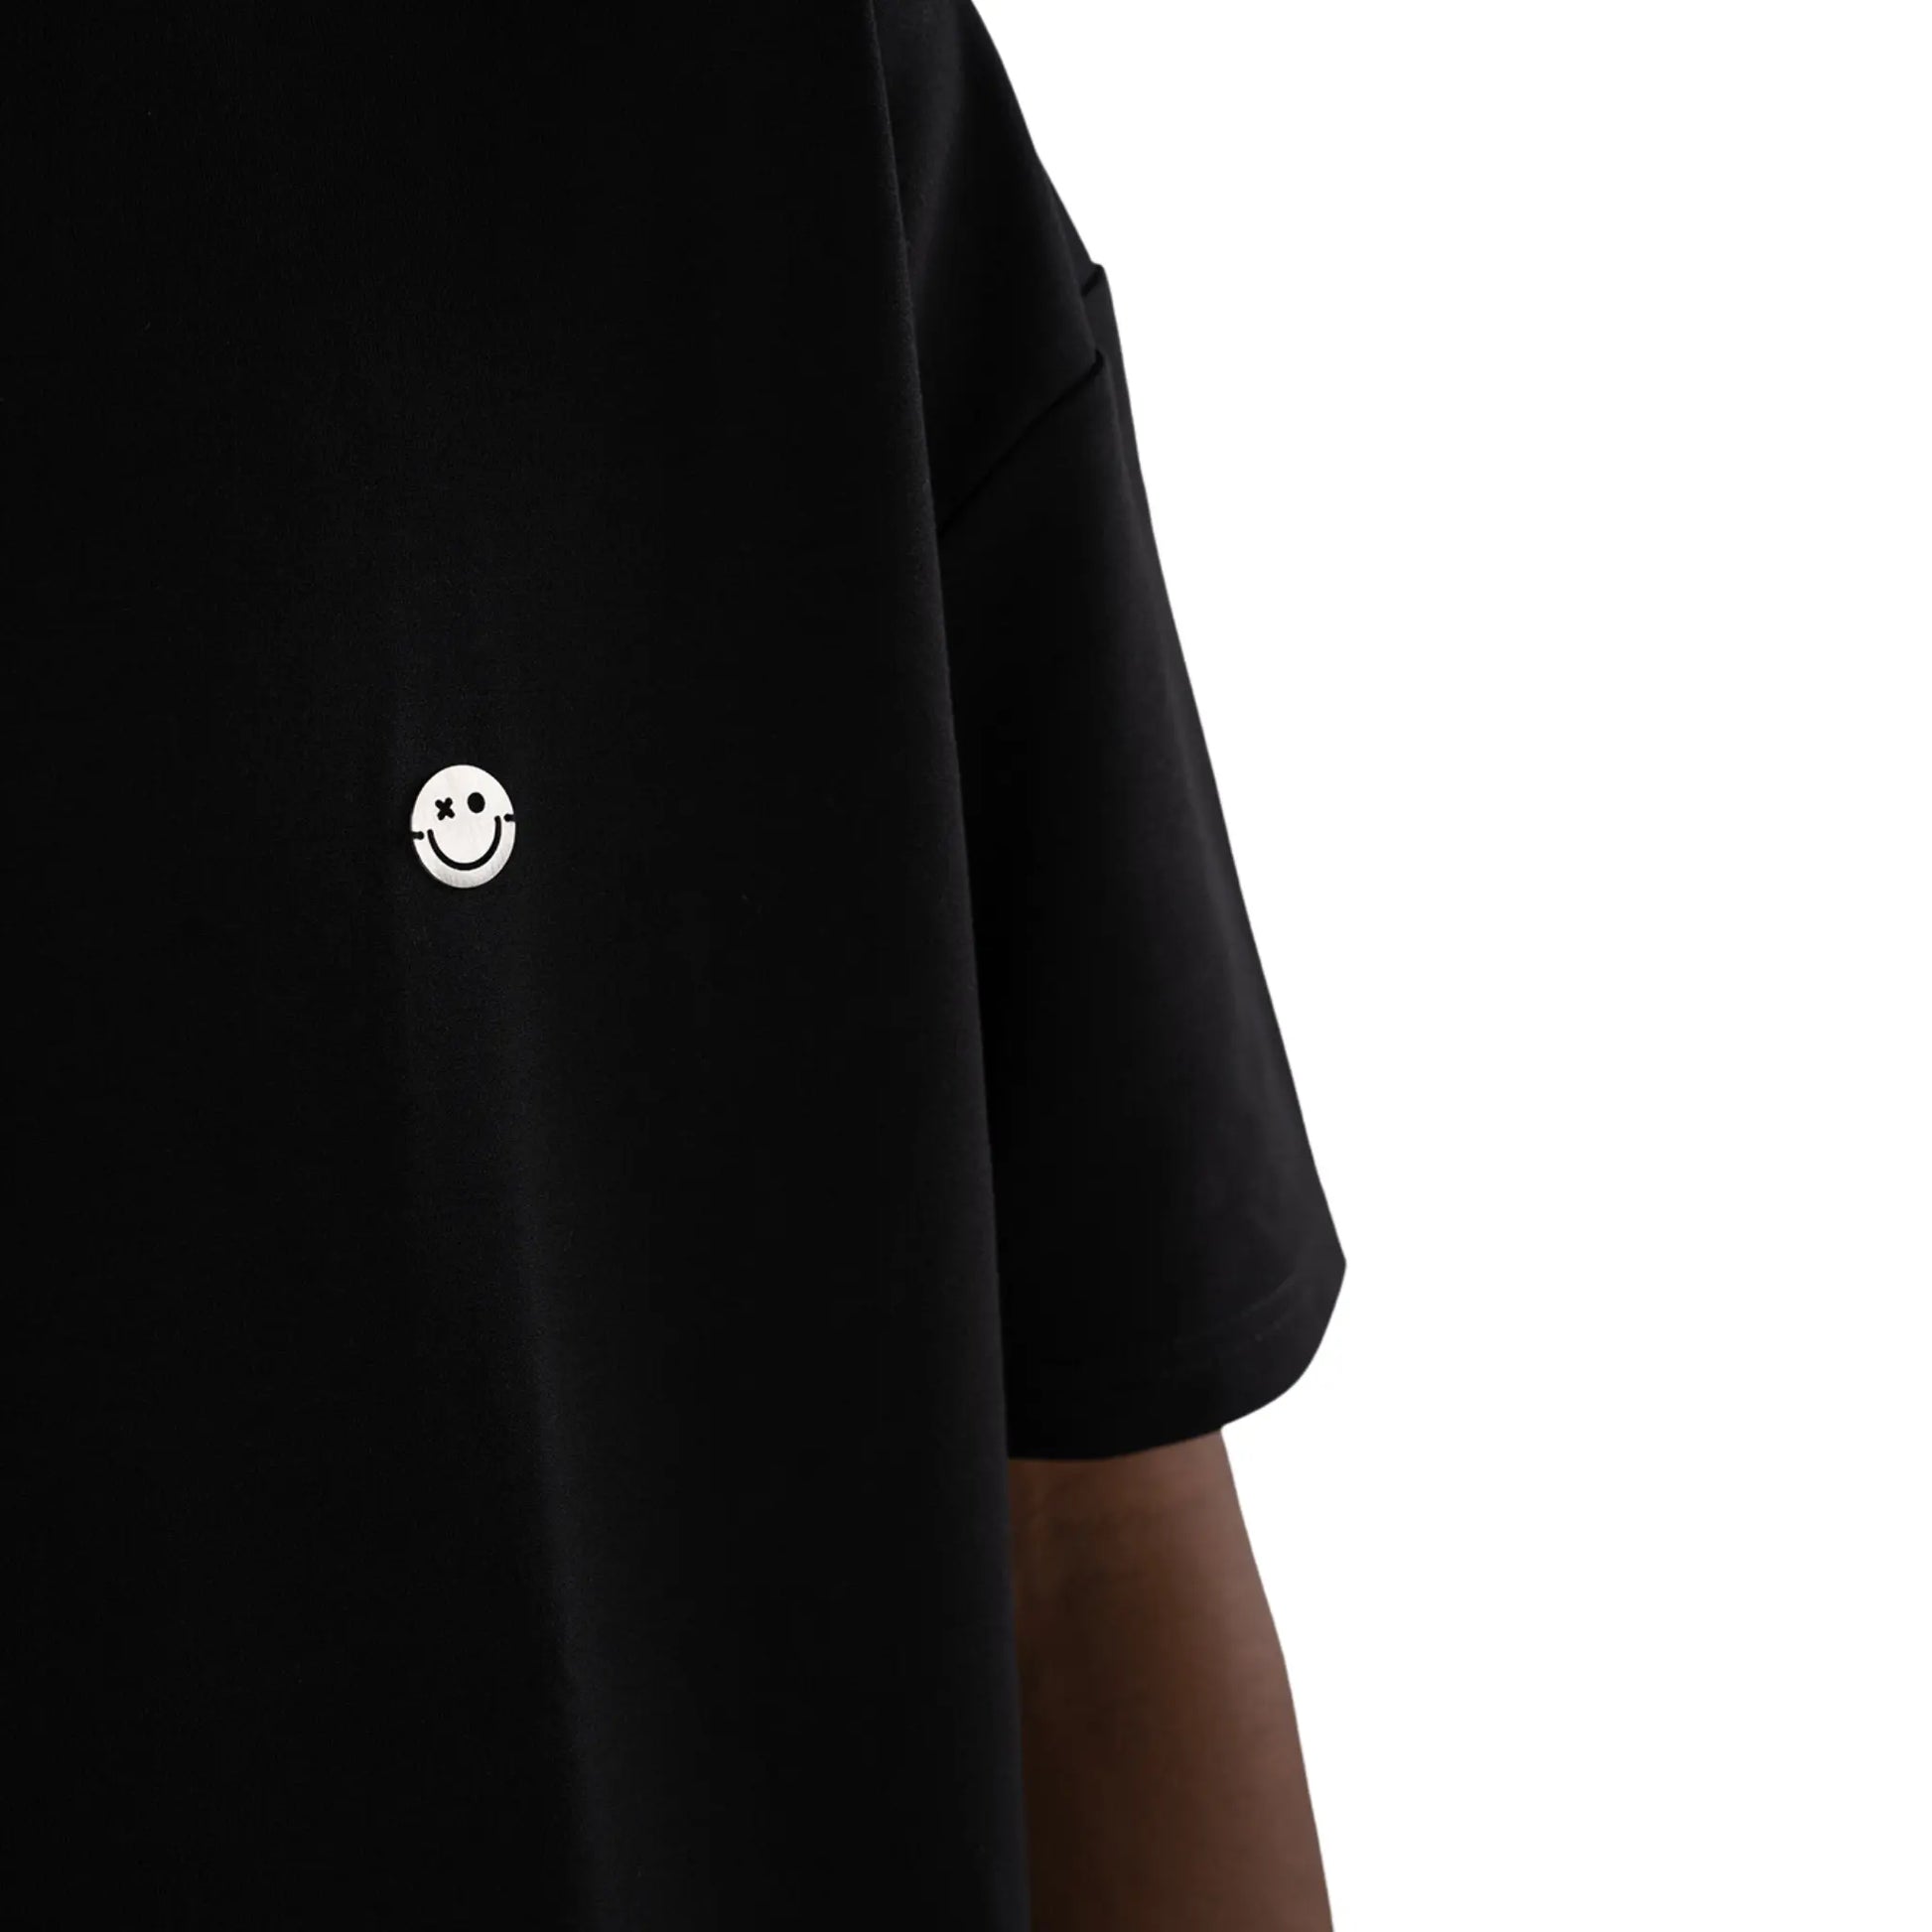 Oversized T-shirt Black close up view on smiley logo